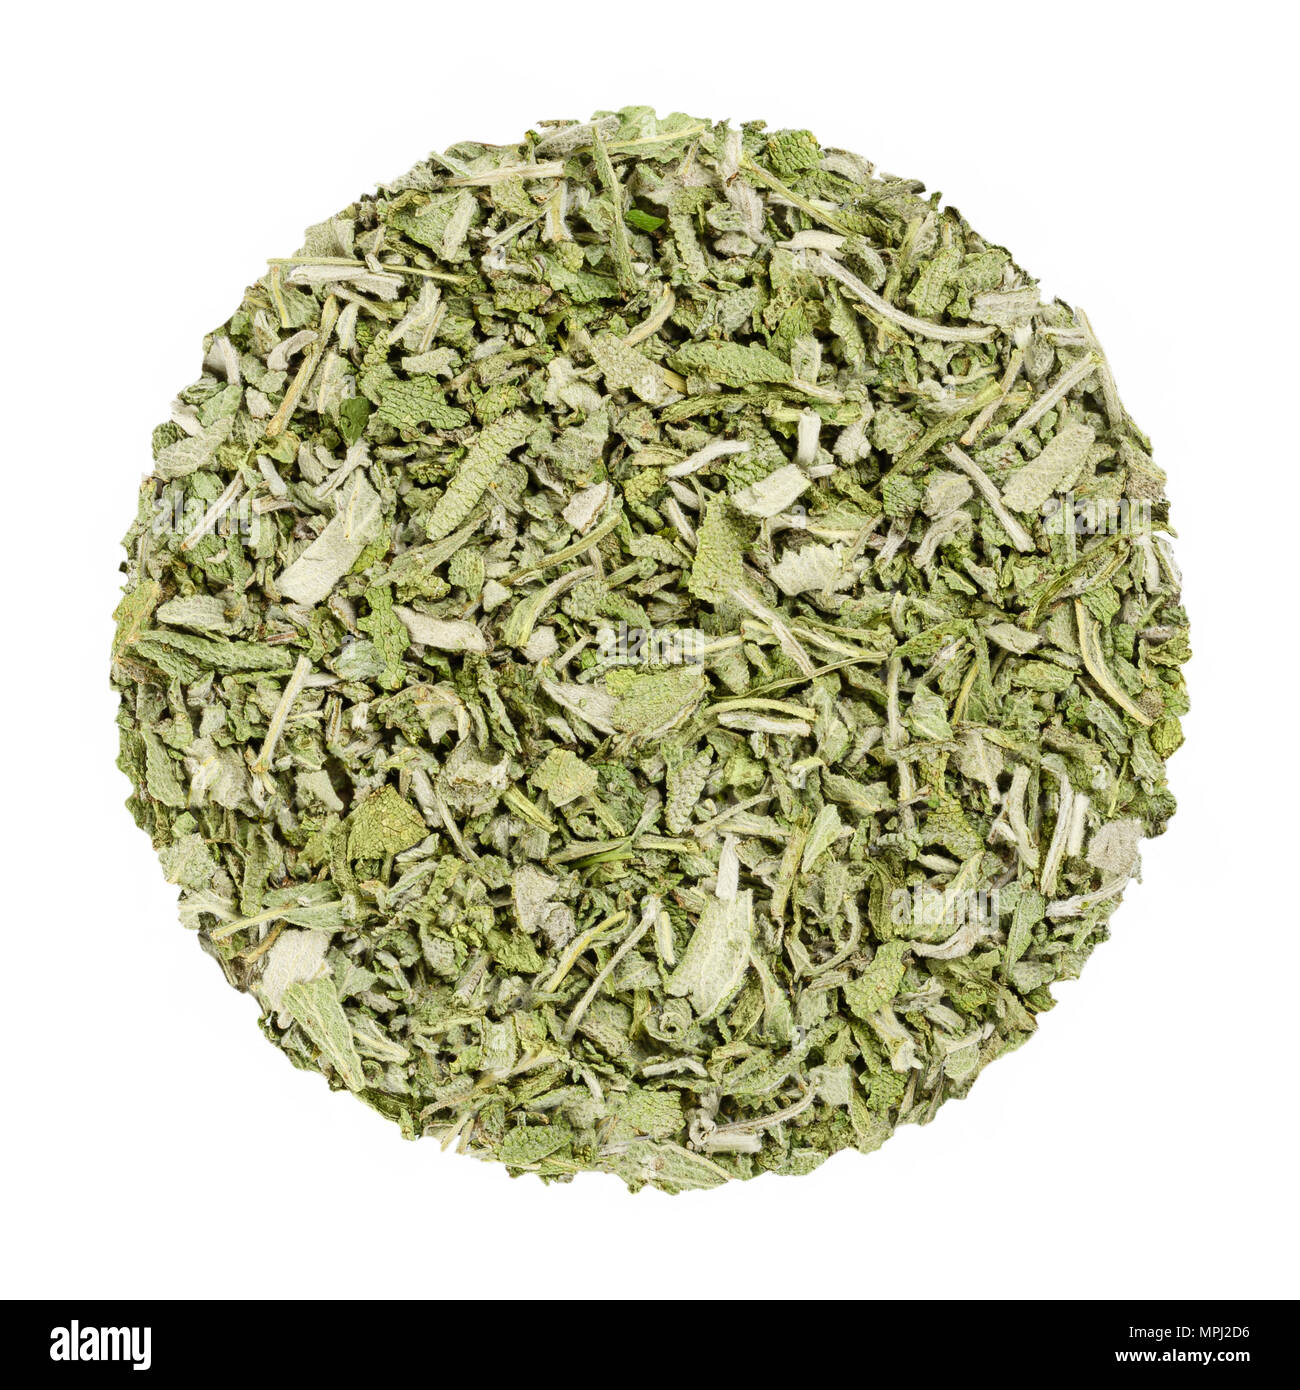 Dried sage. Herb circle from above, isolated, over white. Disc made of chopped common sage. Salvia officinalis. Grayish herb, spice and medical plant. Stock Photo